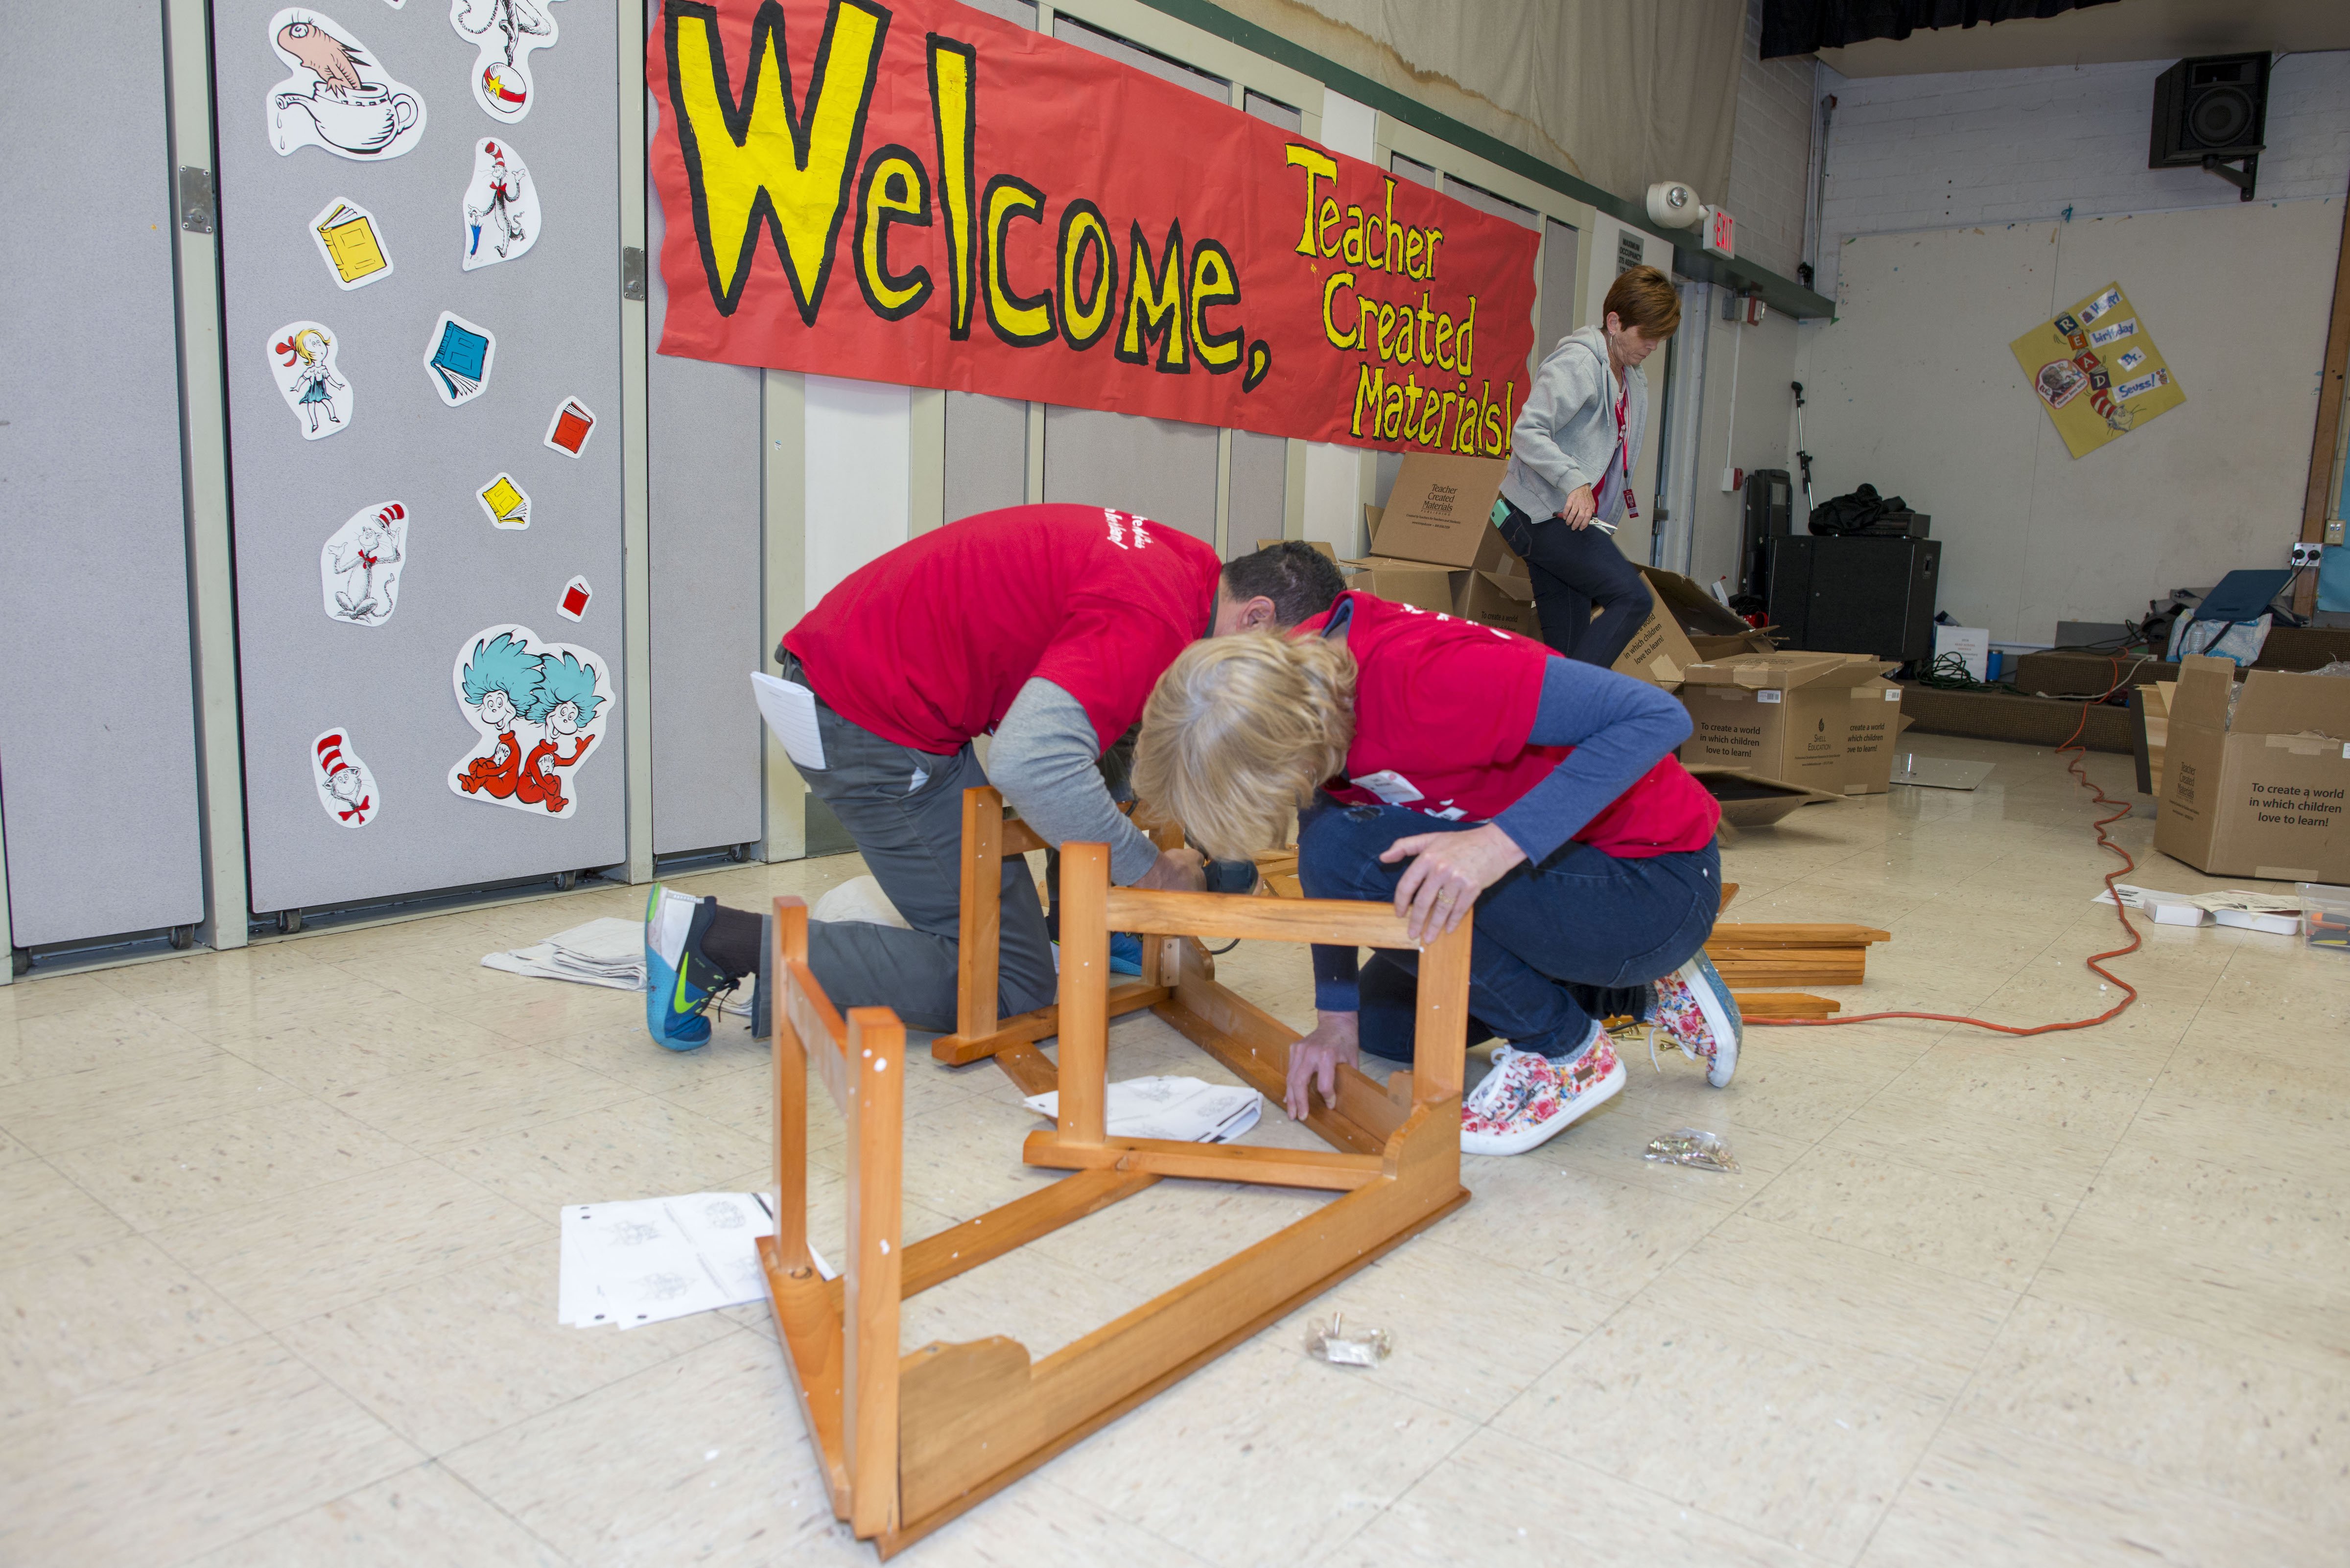 Teacher Created Materials staff build a reading bench for the playground at Carl E. Gilbert Elementary School